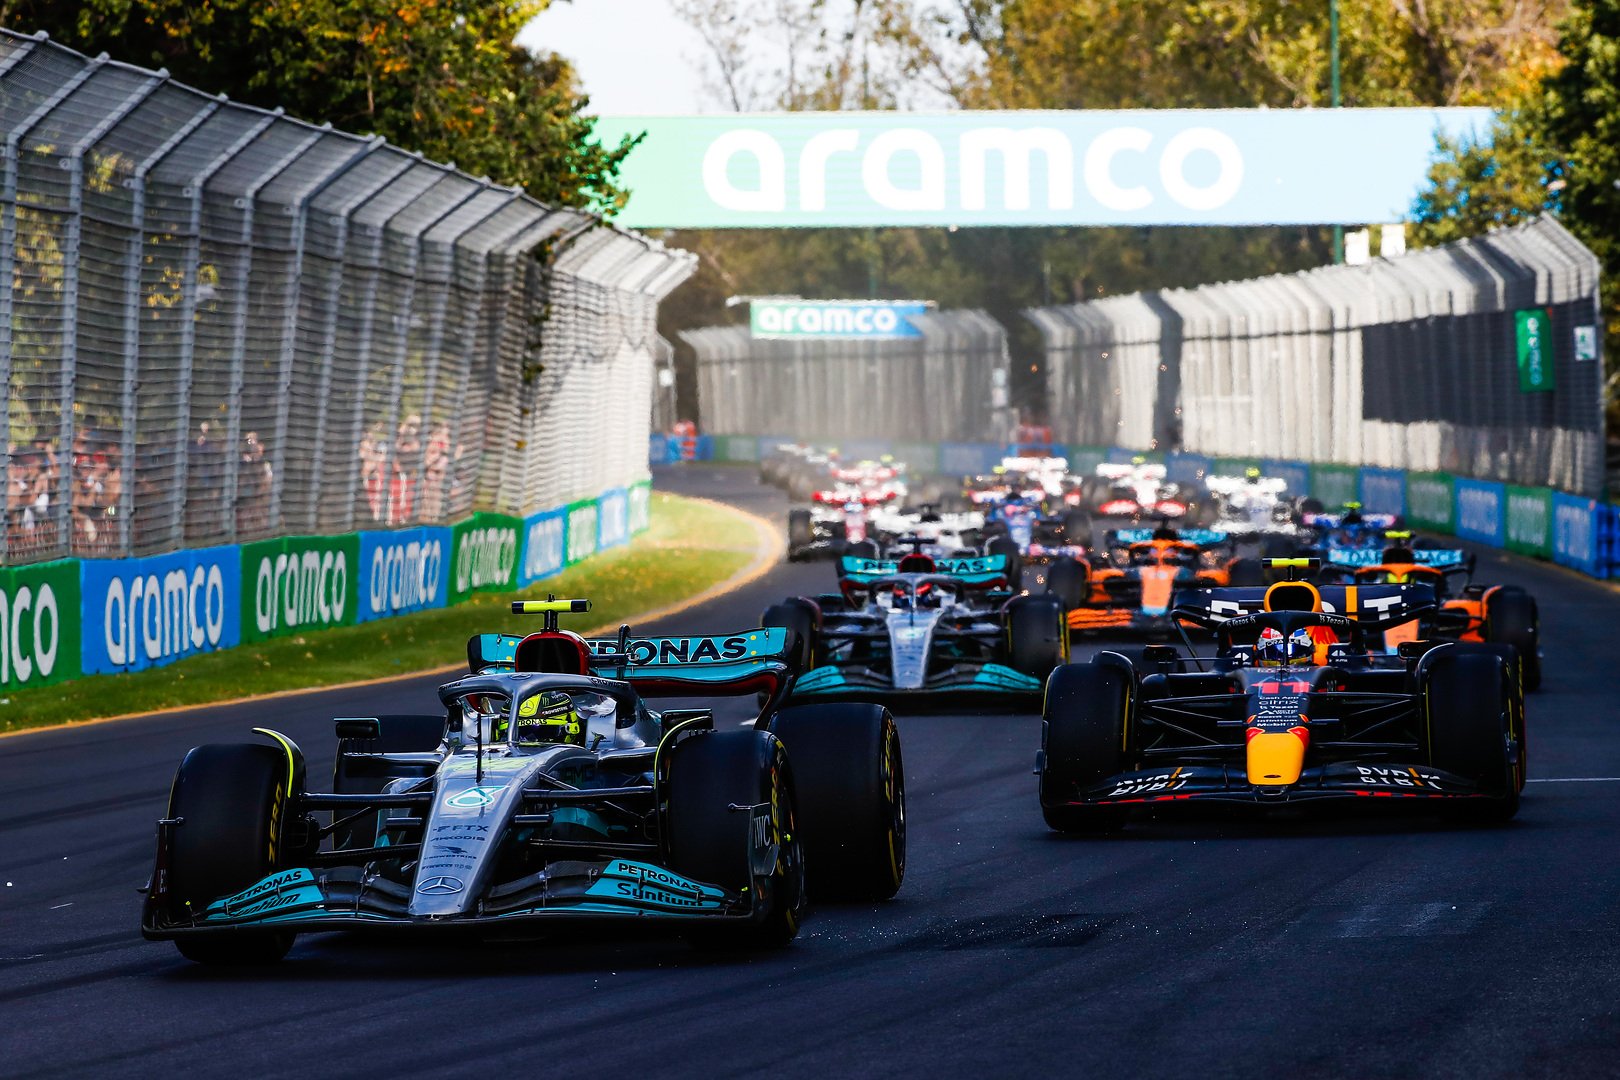 How to watch the Australian Grand Prix track schedule and TV times